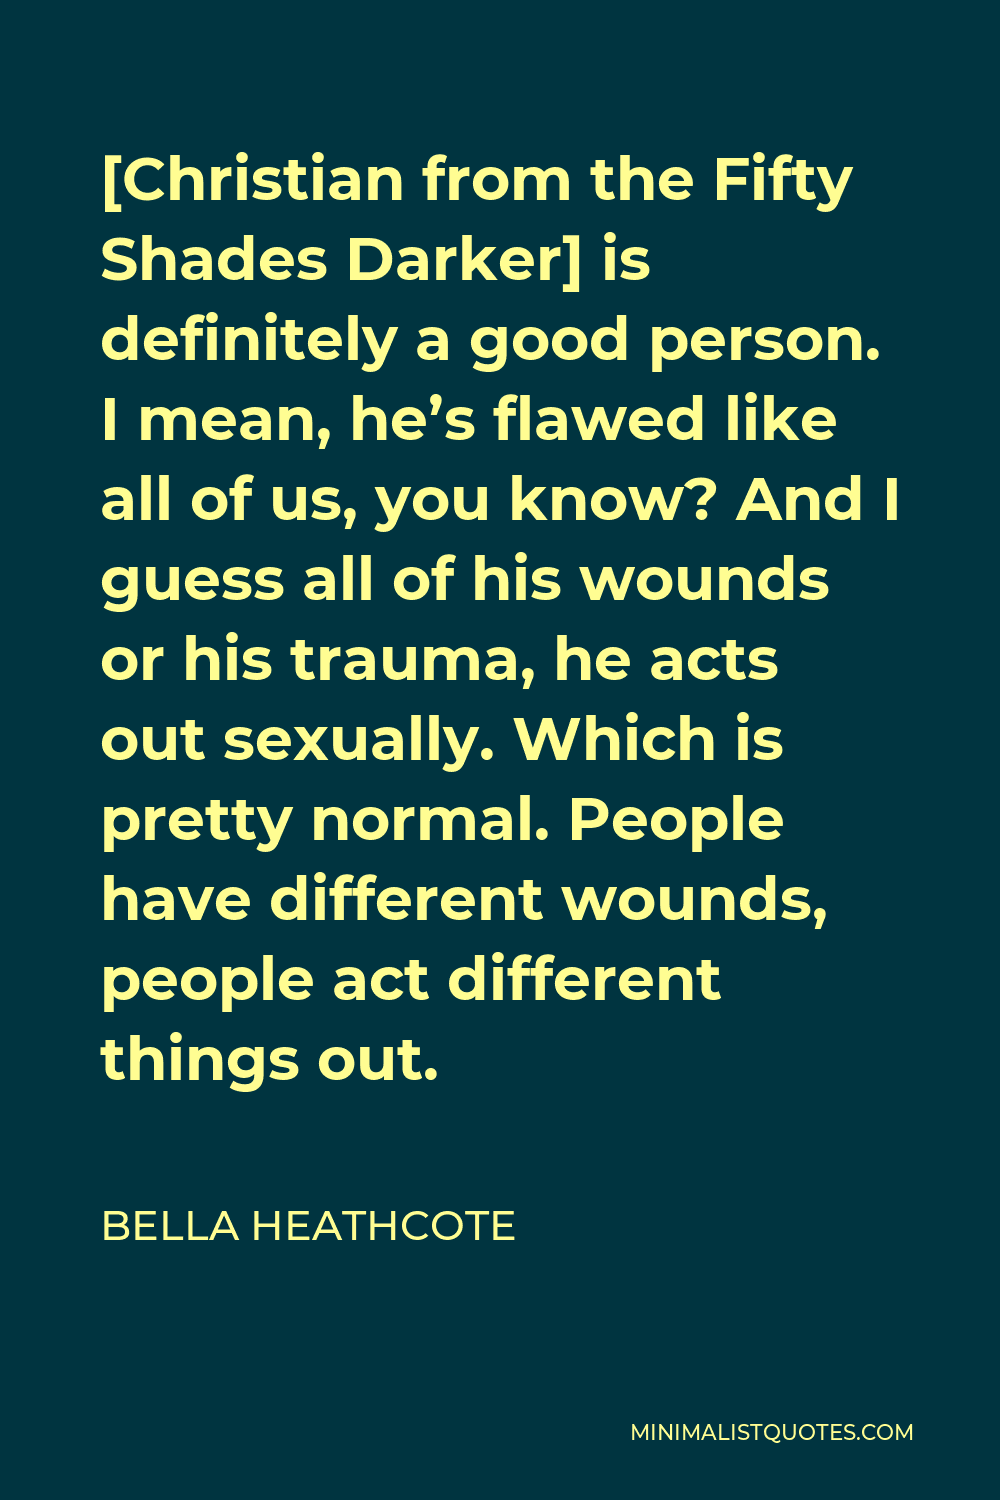 Bella Heathcote Quote - [Christian from the Fifty Shades Darker] is definitely a good person. I mean, he’s flawed like all of us, you know? And I guess all of his wounds or his trauma, he acts out sexually. Which is pretty normal. People have different wounds, people act different things out.